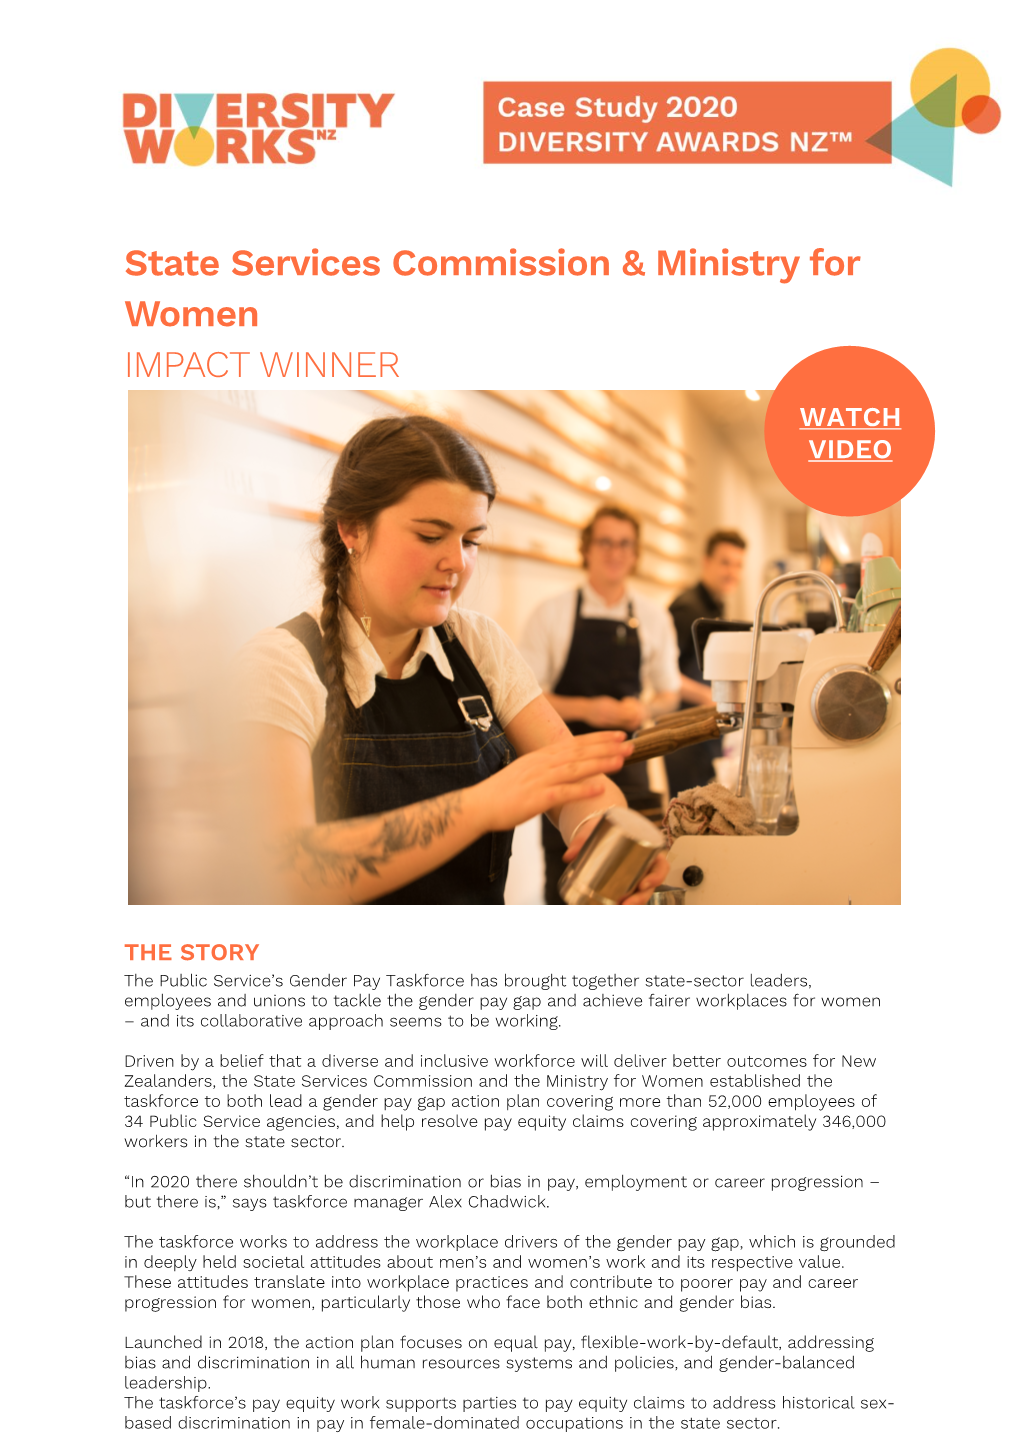 State Services Commission & Ministry for Women IMPACT WINNER